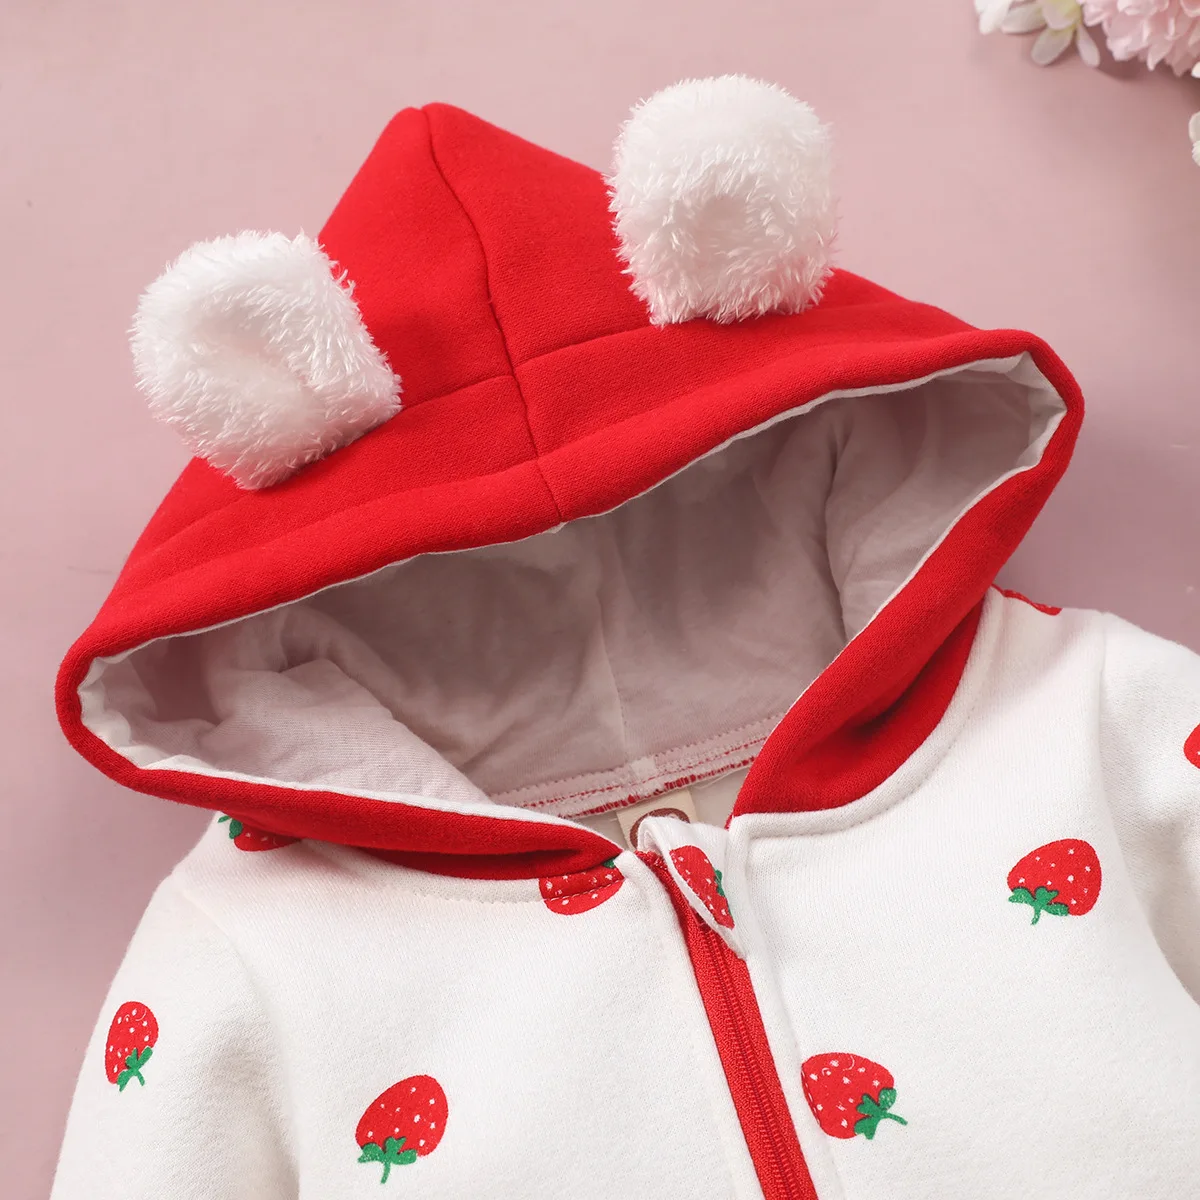 Baby Bodysuits expensive Valentine's Day Girls Rompers Newborn Infant Baby Girls Heart Love Printed Bowknot Long Sleeve Romper Baby Clothes ropa bebes Baby Bodysuits classic